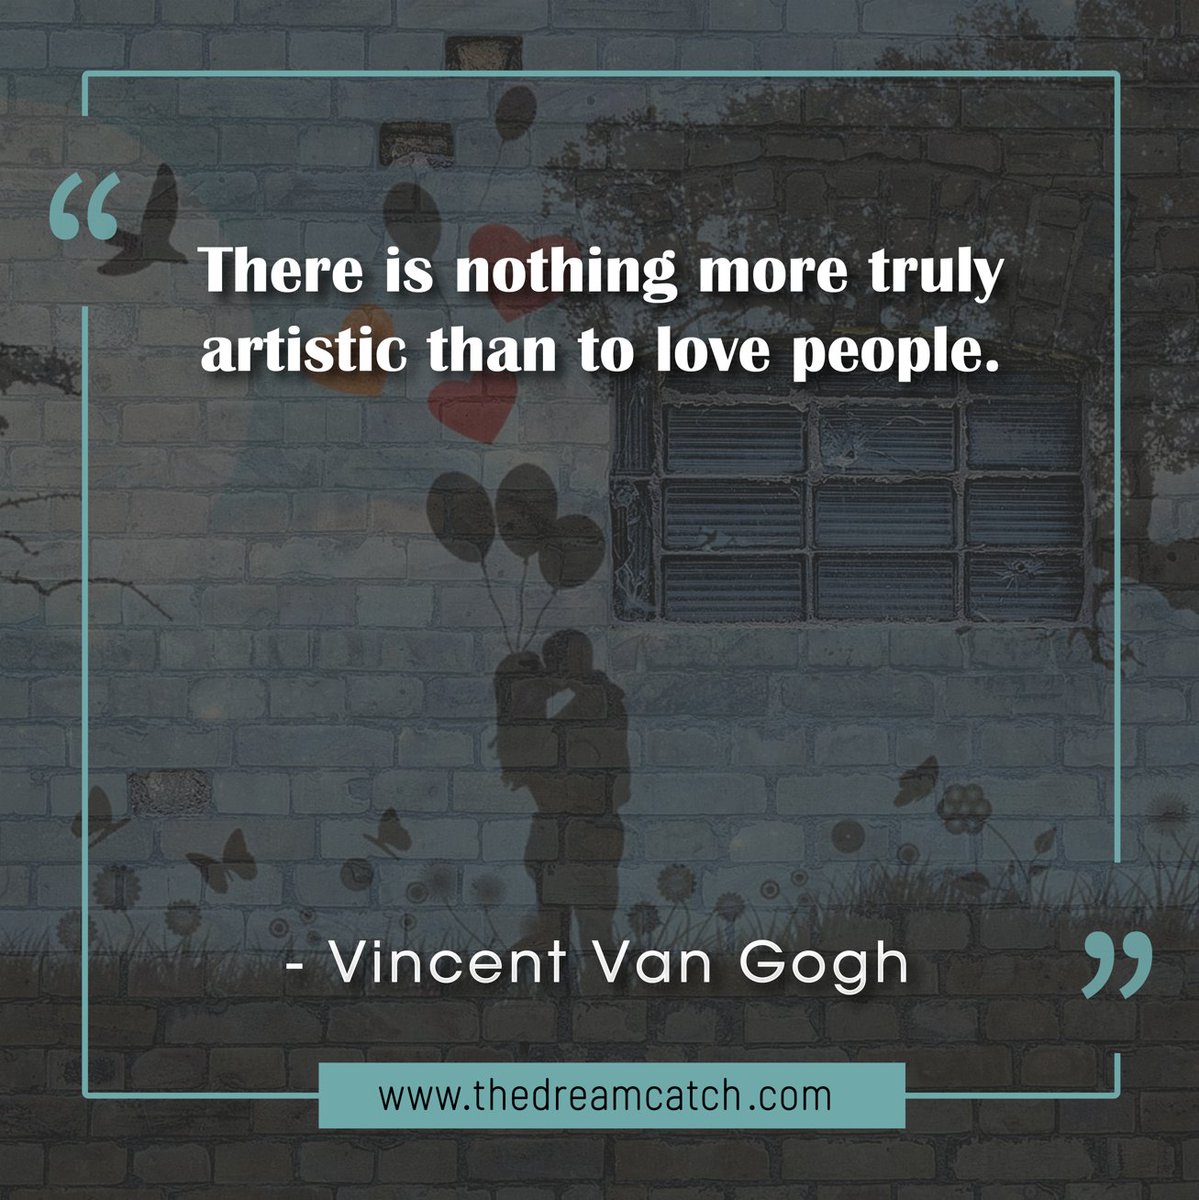 Loving other is an art that all of us are capable of achieving.

Read more: thedreamcatch.com/spread-more-lo…

#love #relationships #art #quotes #sundaywisdom